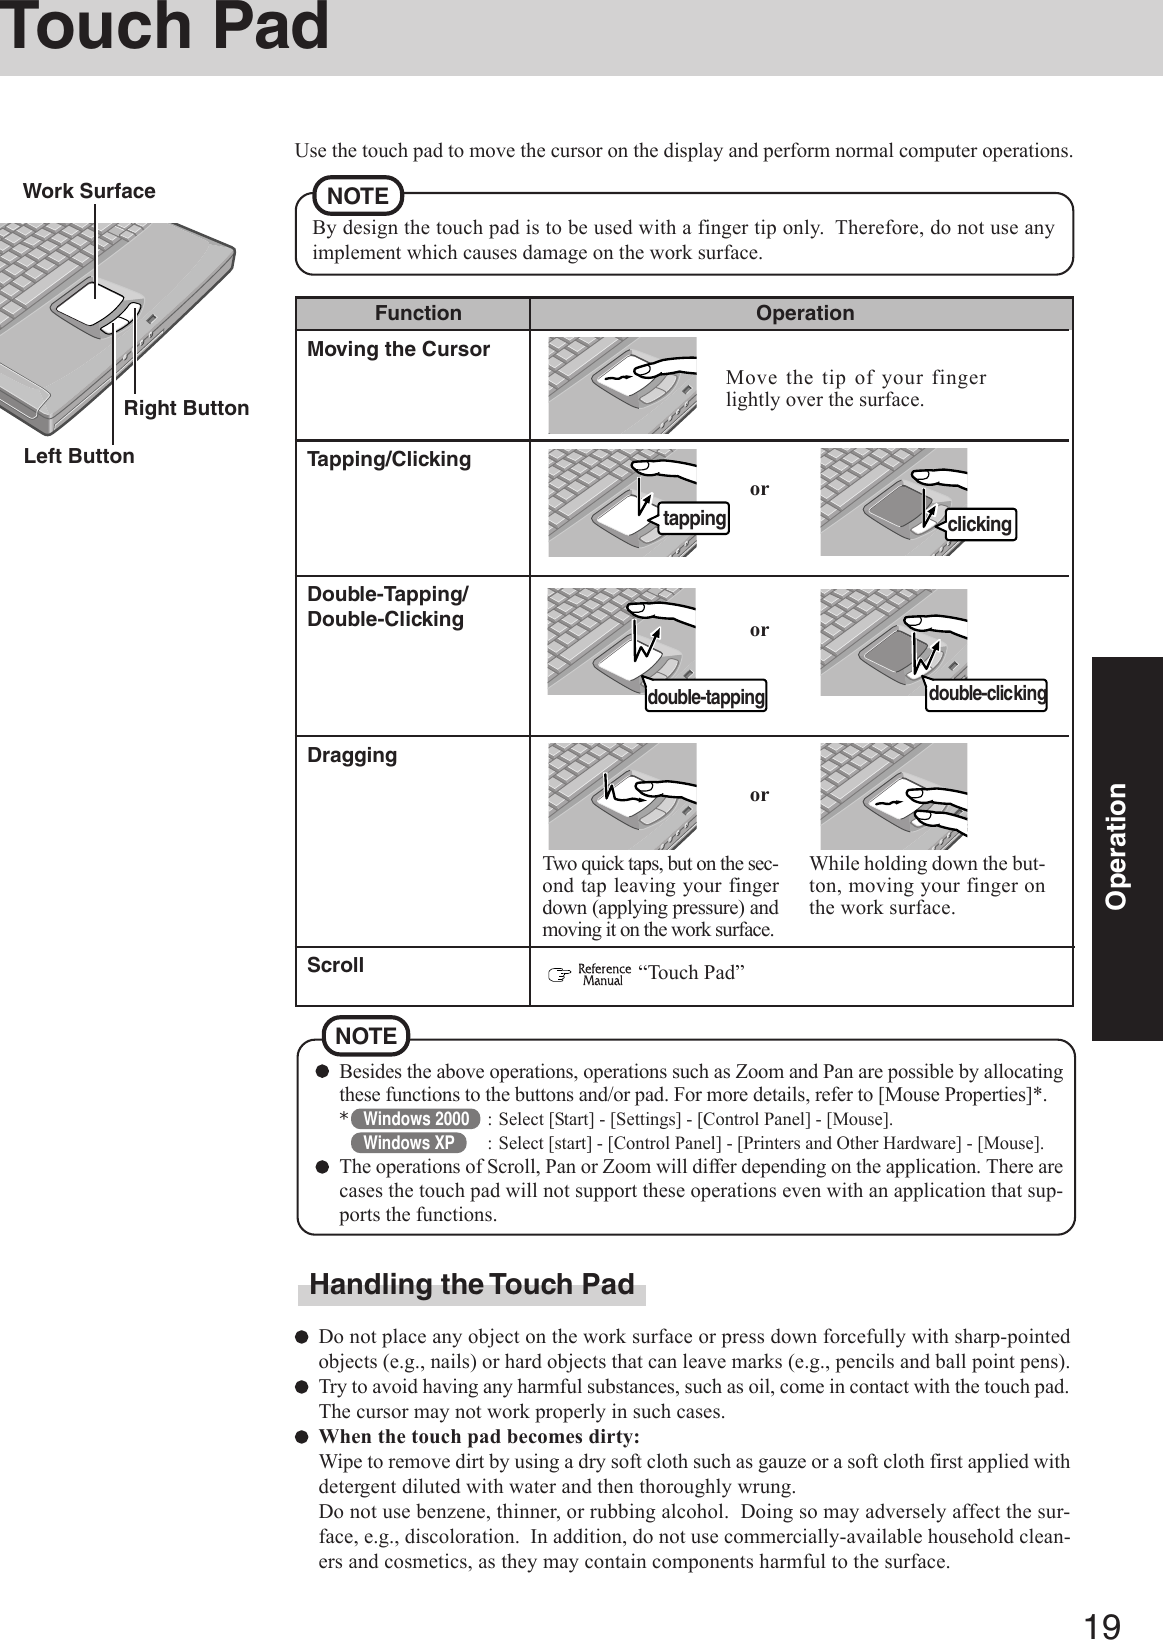 19OperationFunctionTouch PadUse the touch pad to move the cursor on the display and perform normal computer operations.Do not place any object on the work surface or press down forcefully with sharp-pointedobjects (e.g., nails) or hard objects that can leave marks (e.g., pencils and ball point pens).Try to avoid having any harmful substances, such as oil, come in contact with the touch pad.The cursor may not work properly in such cases.When the touch pad becomes dirty:Wipe to remove dirt by using a dry soft cloth such as gauze or a soft cloth first applied withdetergent diluted with water and then thoroughly wrung.Do not use benzene, thinner, or rubbing alcohol.  Doing so may adversely affect the sur-face, e.g., discoloration.  In addition, do not use commercially-available household clean-ers and cosmetics, as they may contain components harmful to the surface.By design the touch pad is to be used with a finger tip only.  Therefore, do not use anyimplement which causes damage on the work surface.Left ButtonRight ButtonWork Surface NOTEorTwo quick taps, but on the sec-ond tap leaving your fingerdown (applying pressure) andmoving it on the work surface.While holding down the but-ton, moving your finger onthe work surface.orOperationMoving the CursorTapping/ClickingDouble-Tapping/Double-ClickingDraggingScrollorMove the tip of your fingerlightly over the surface.tapping clickingdouble-tapping double-clickingHandling the Touch Pad  “Touch Pad”Besides the above operations, operations such as Zoom and Pan are possible by allocatingthese functions to the buttons and/or pad. For more details, refer to [Mouse Properties]*.*Windows 2000 :Select [Start] - [Settings] - [Control Panel] - [Mouse].Windows XP: Select [start] - [Control Panel] - [Printers and Other Hardware] - [Mouse].The operations of Scroll, Pan or Zoom will differ depending on the application. There arecases the touch pad will not support these operations even with an application that sup-ports the functions.NOTE